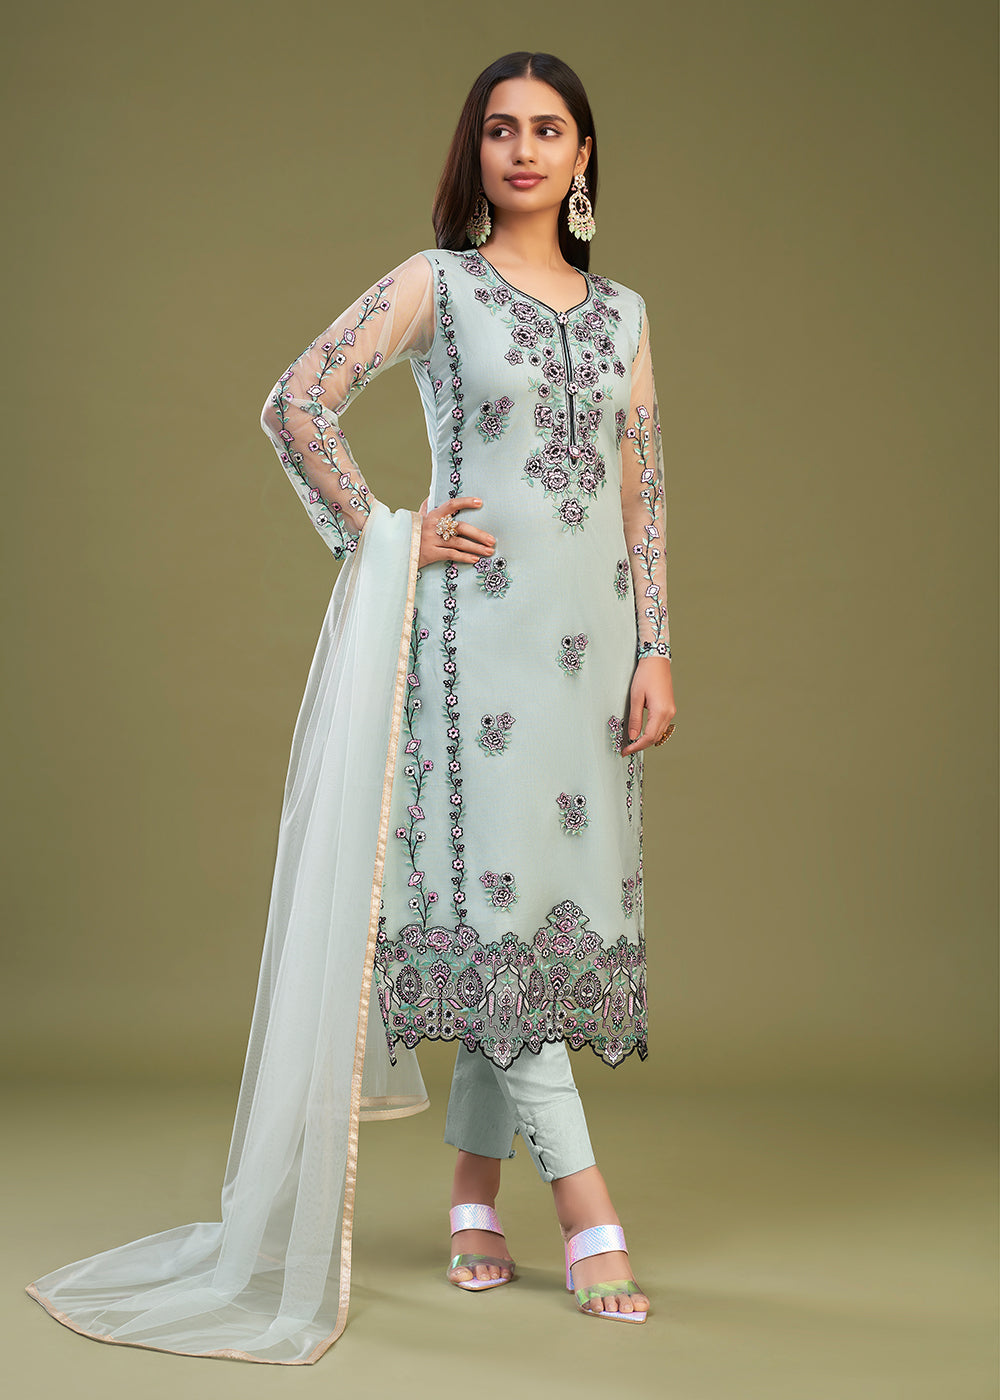 Buy Now Firozi Multi Thread Embroidered Net Salwar Suit Online in USA, UK, Canada, Germany, Australia & Worldwide at Empress Clothing.